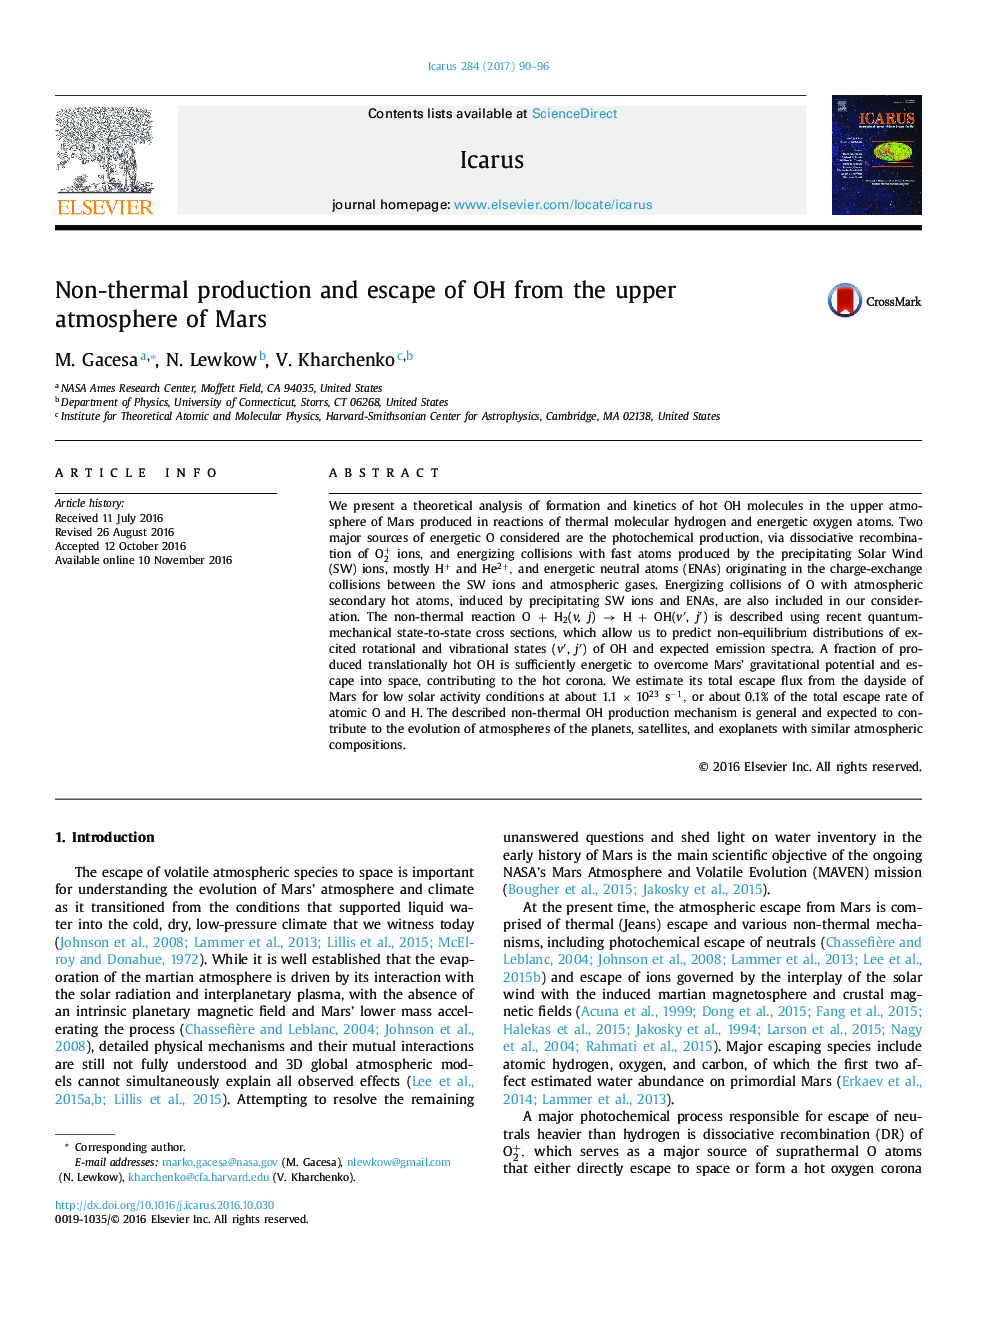 Non-thermal production and escape of OH from the upper atmosphere of Mars